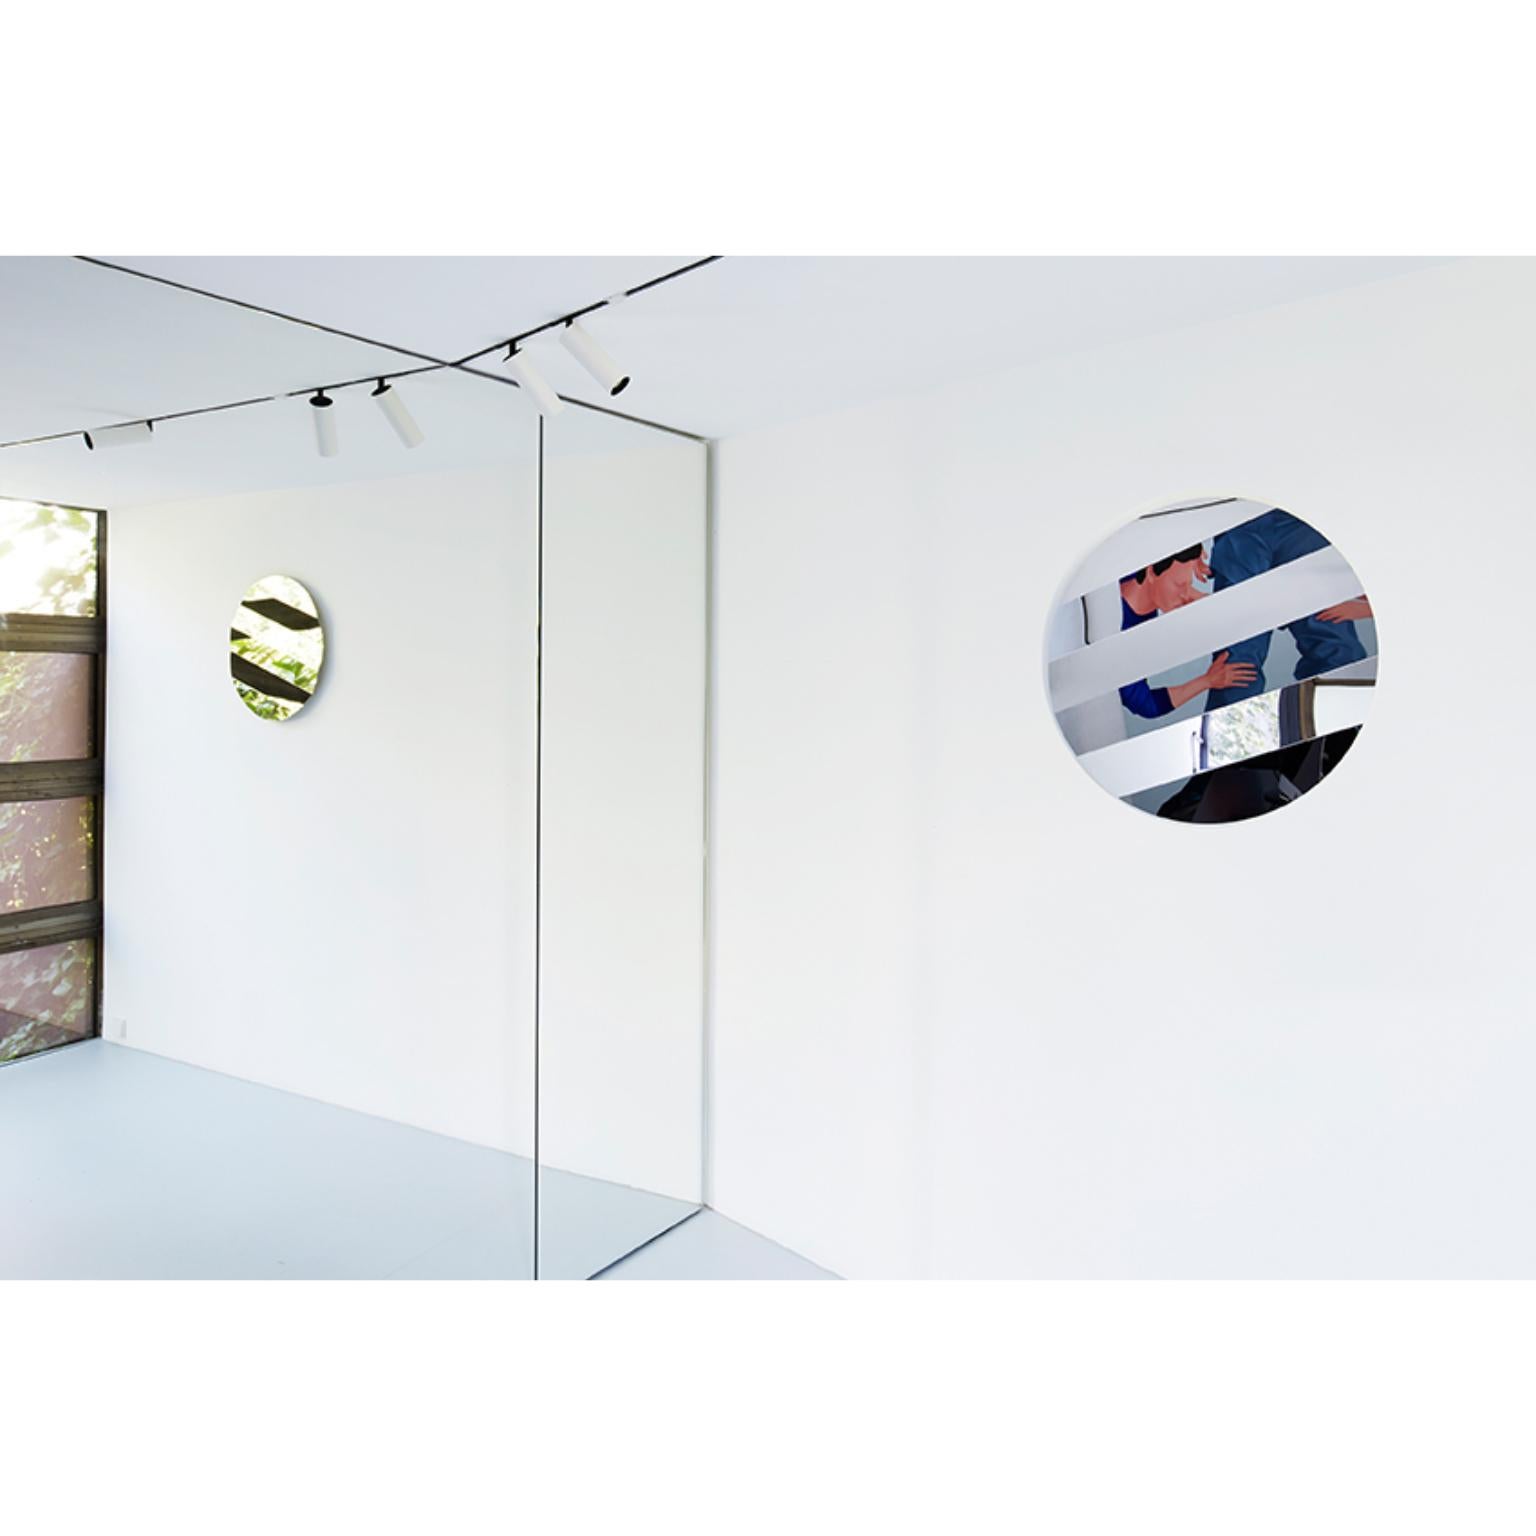 Stripe mirror 60 circle by Sebastian Scherer
Dimensions: ø : 60 
Materials: Mirror, stainless steel, wooden bracket
Different sizes are available. Square version available.

The STRIPE wall mirror creates a fascinating graphic effect: the minimally